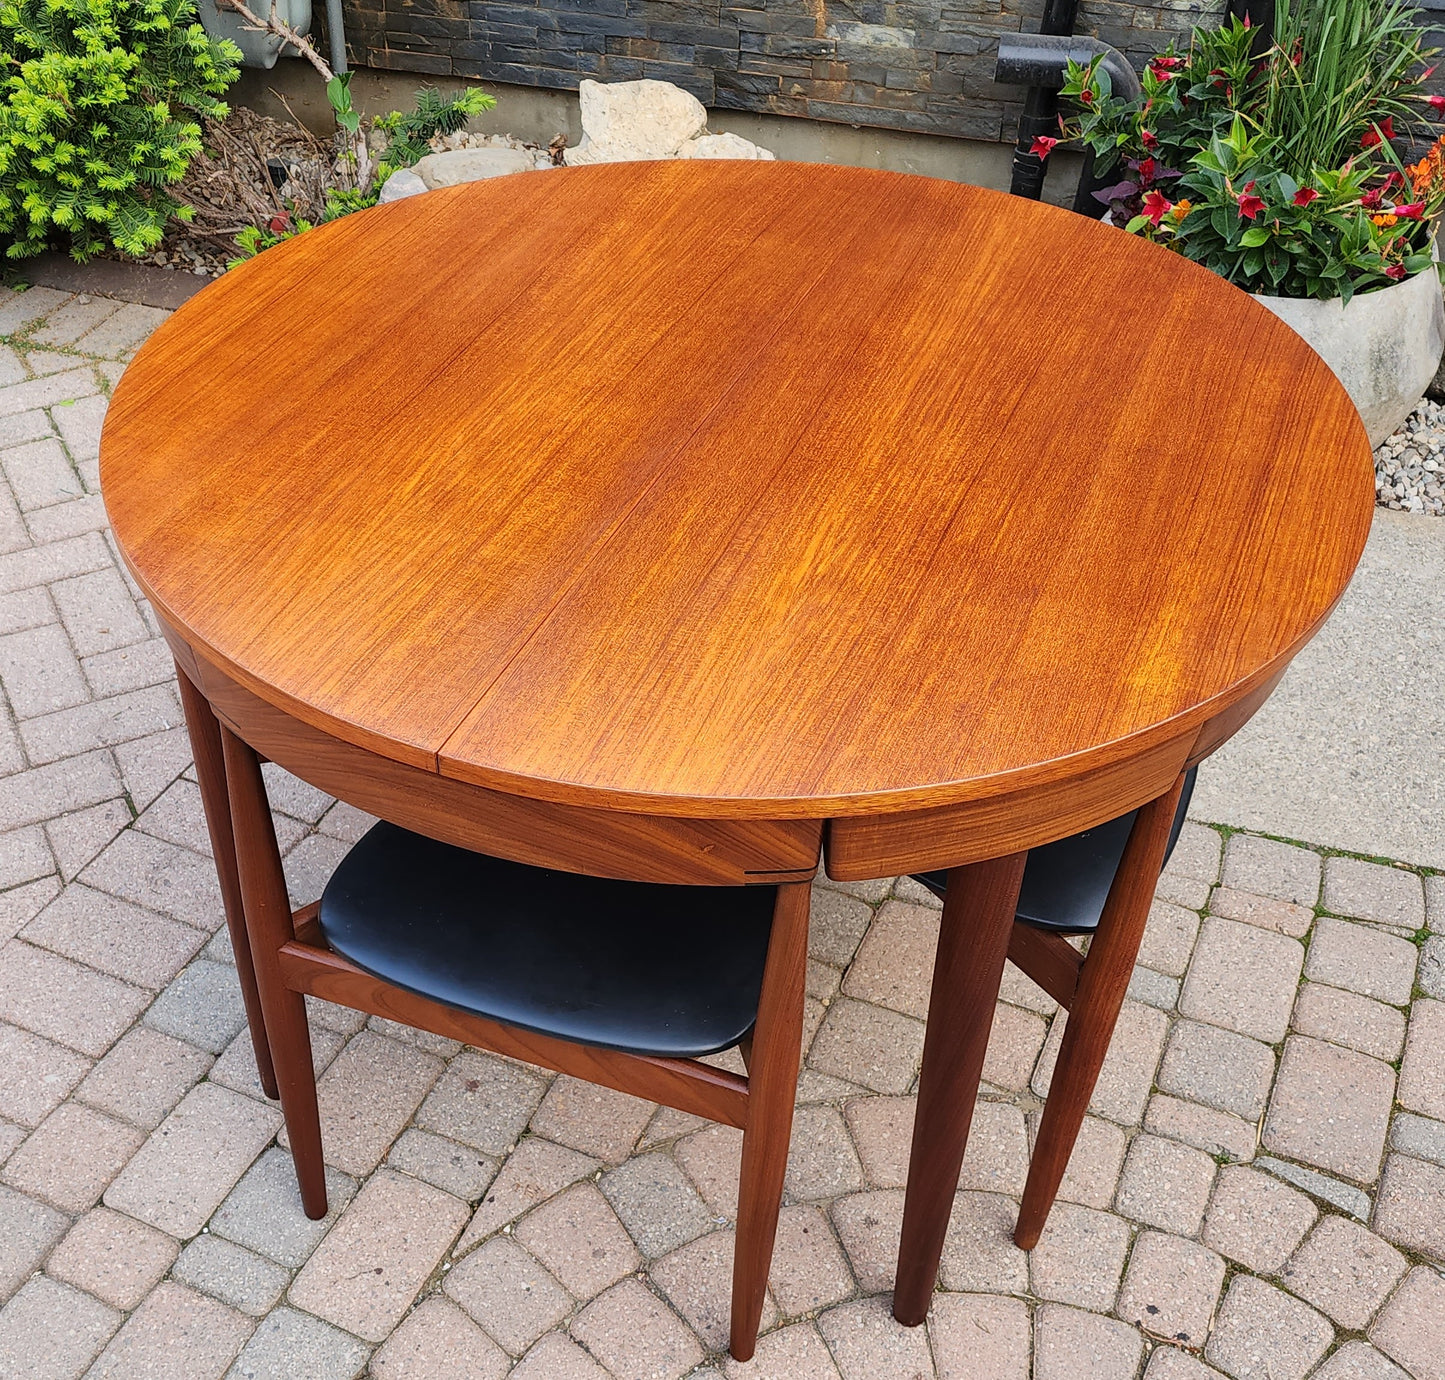 REFINISHED Danish MCM ROUNDETTE Teak Extension Table & 4 Chairs by Hans Olsen